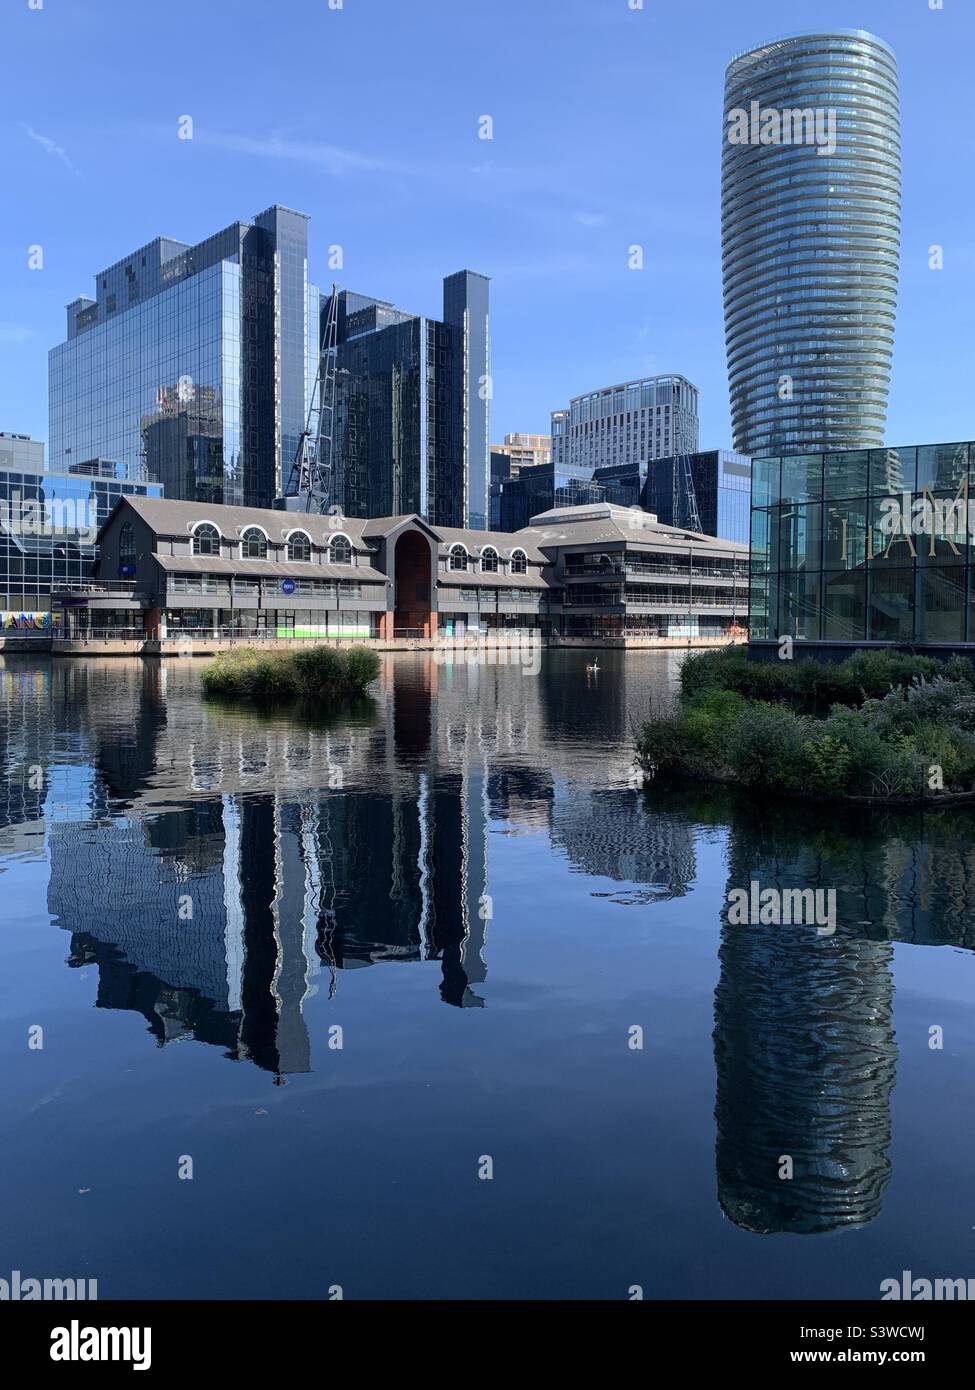 Harbour exchange in Canary Wharf London docklands reflection of buildings in water Stock Photo